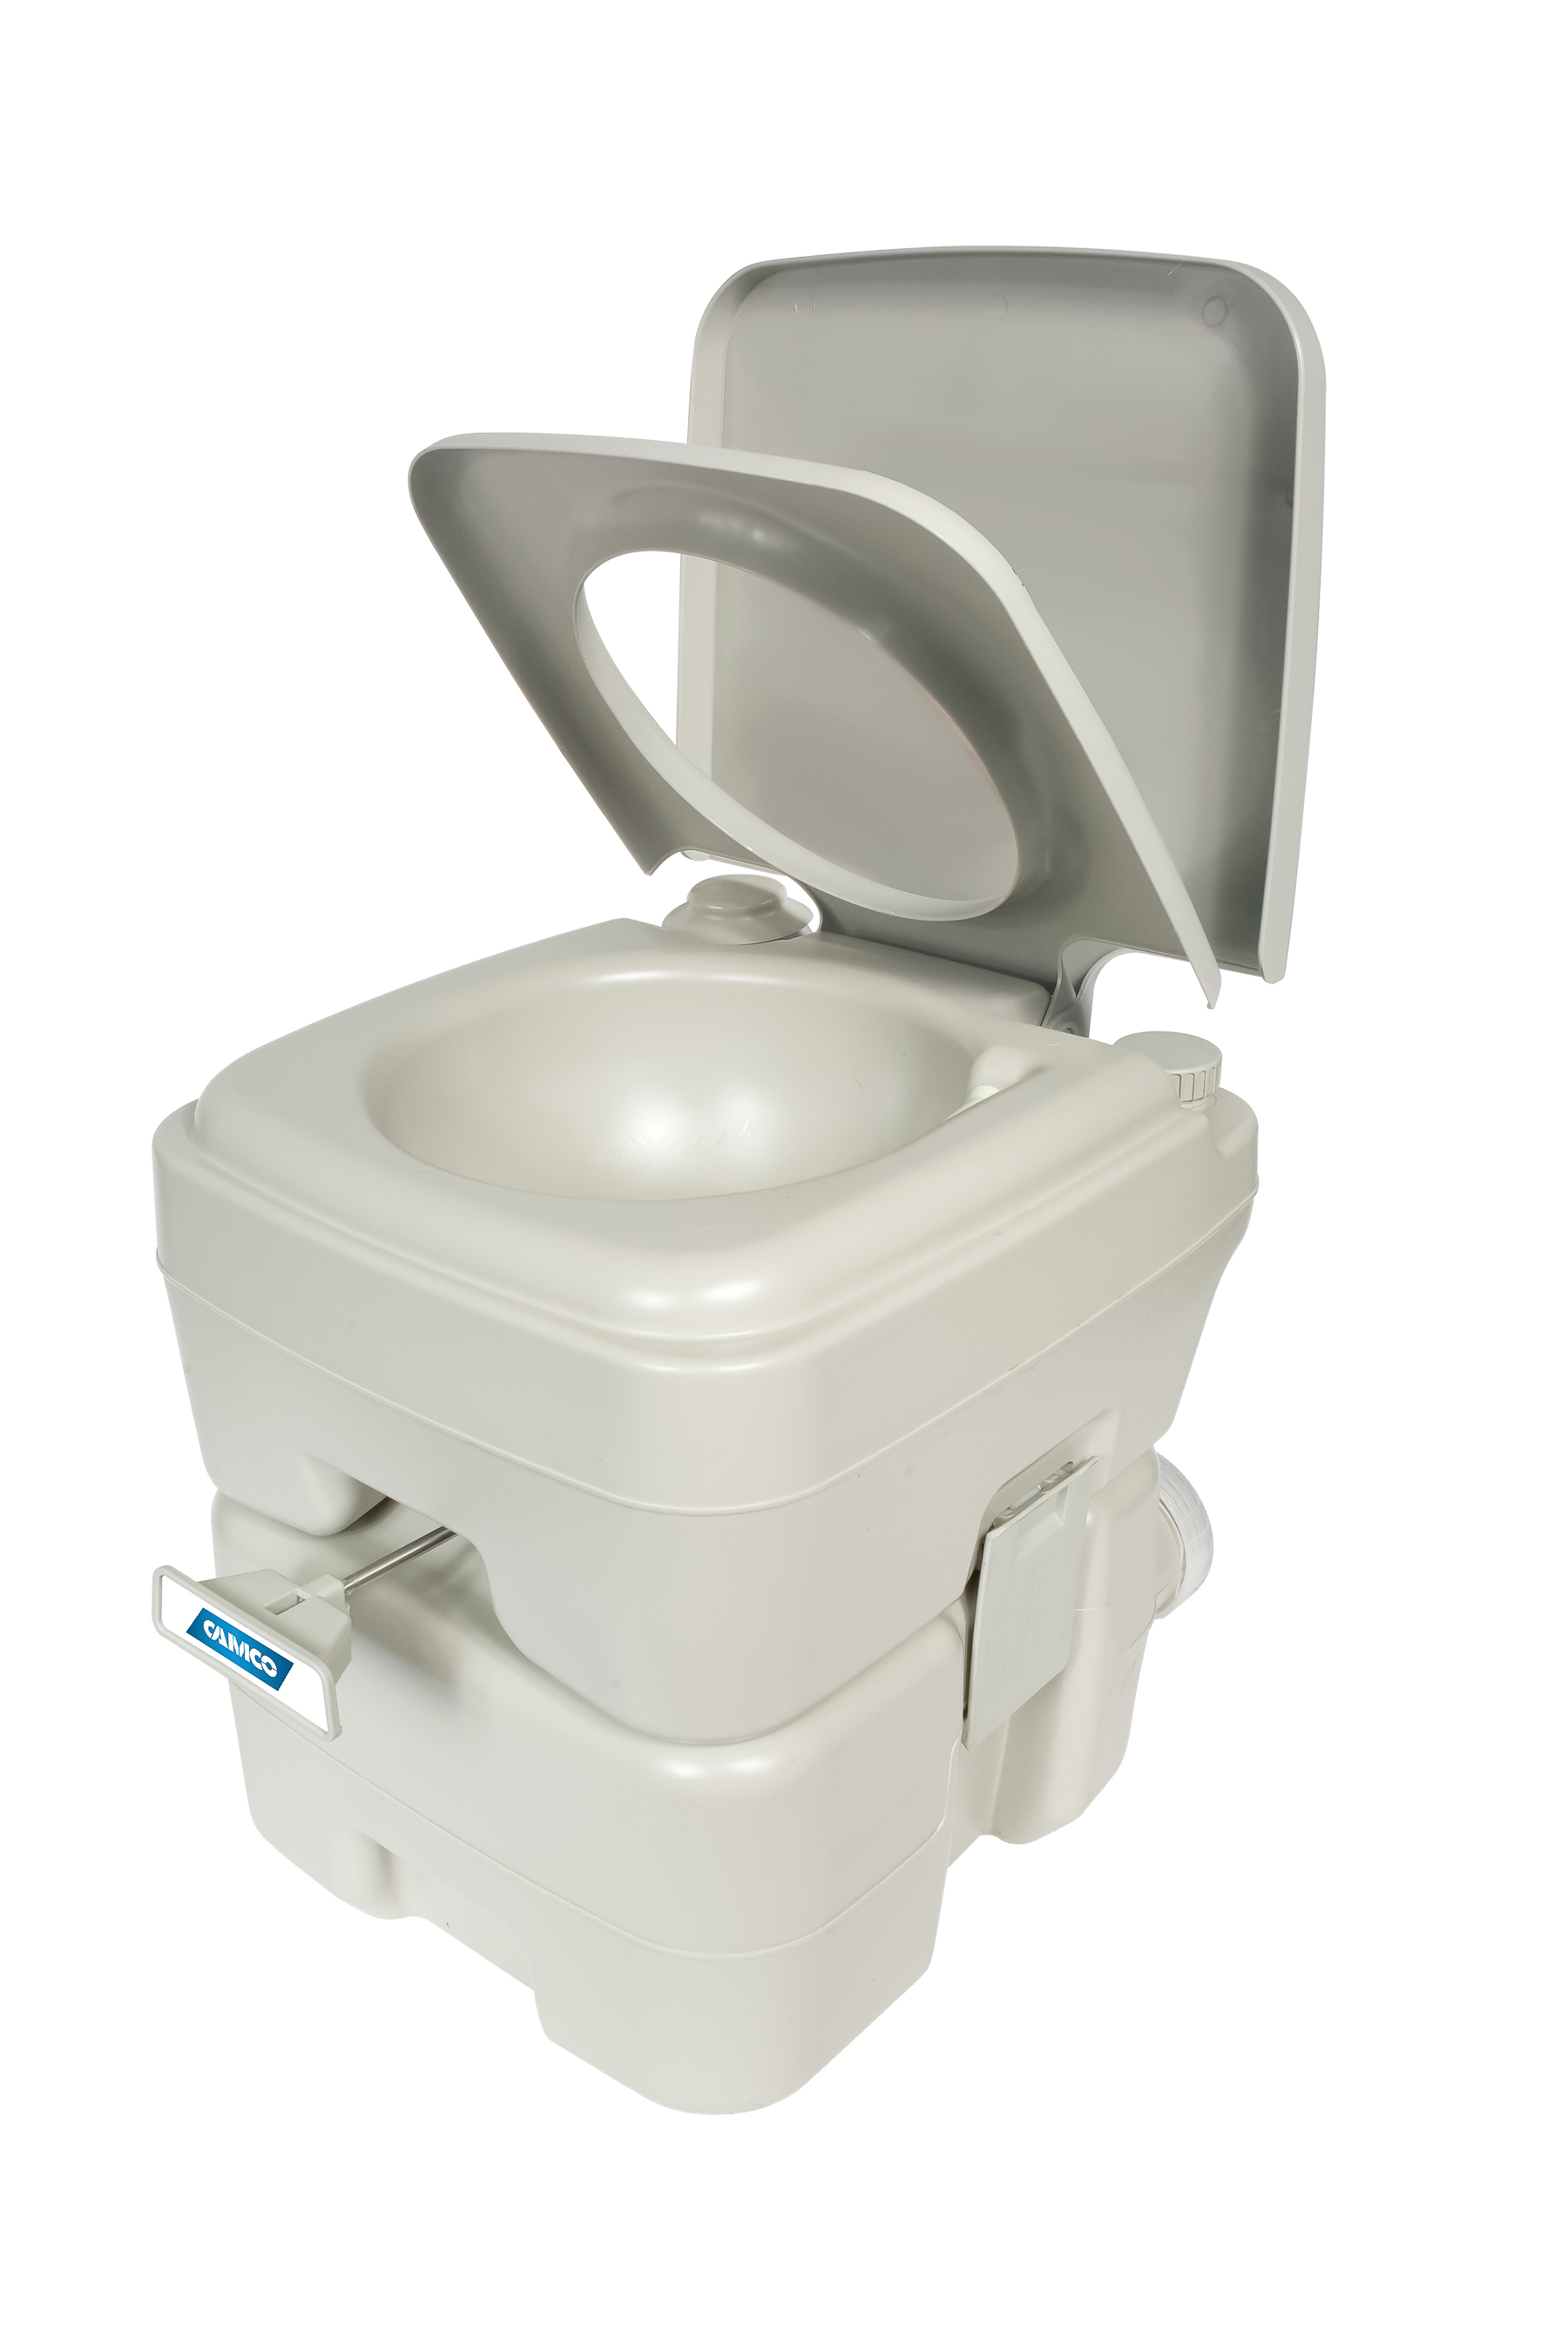 Camco Portable Toilet for RV